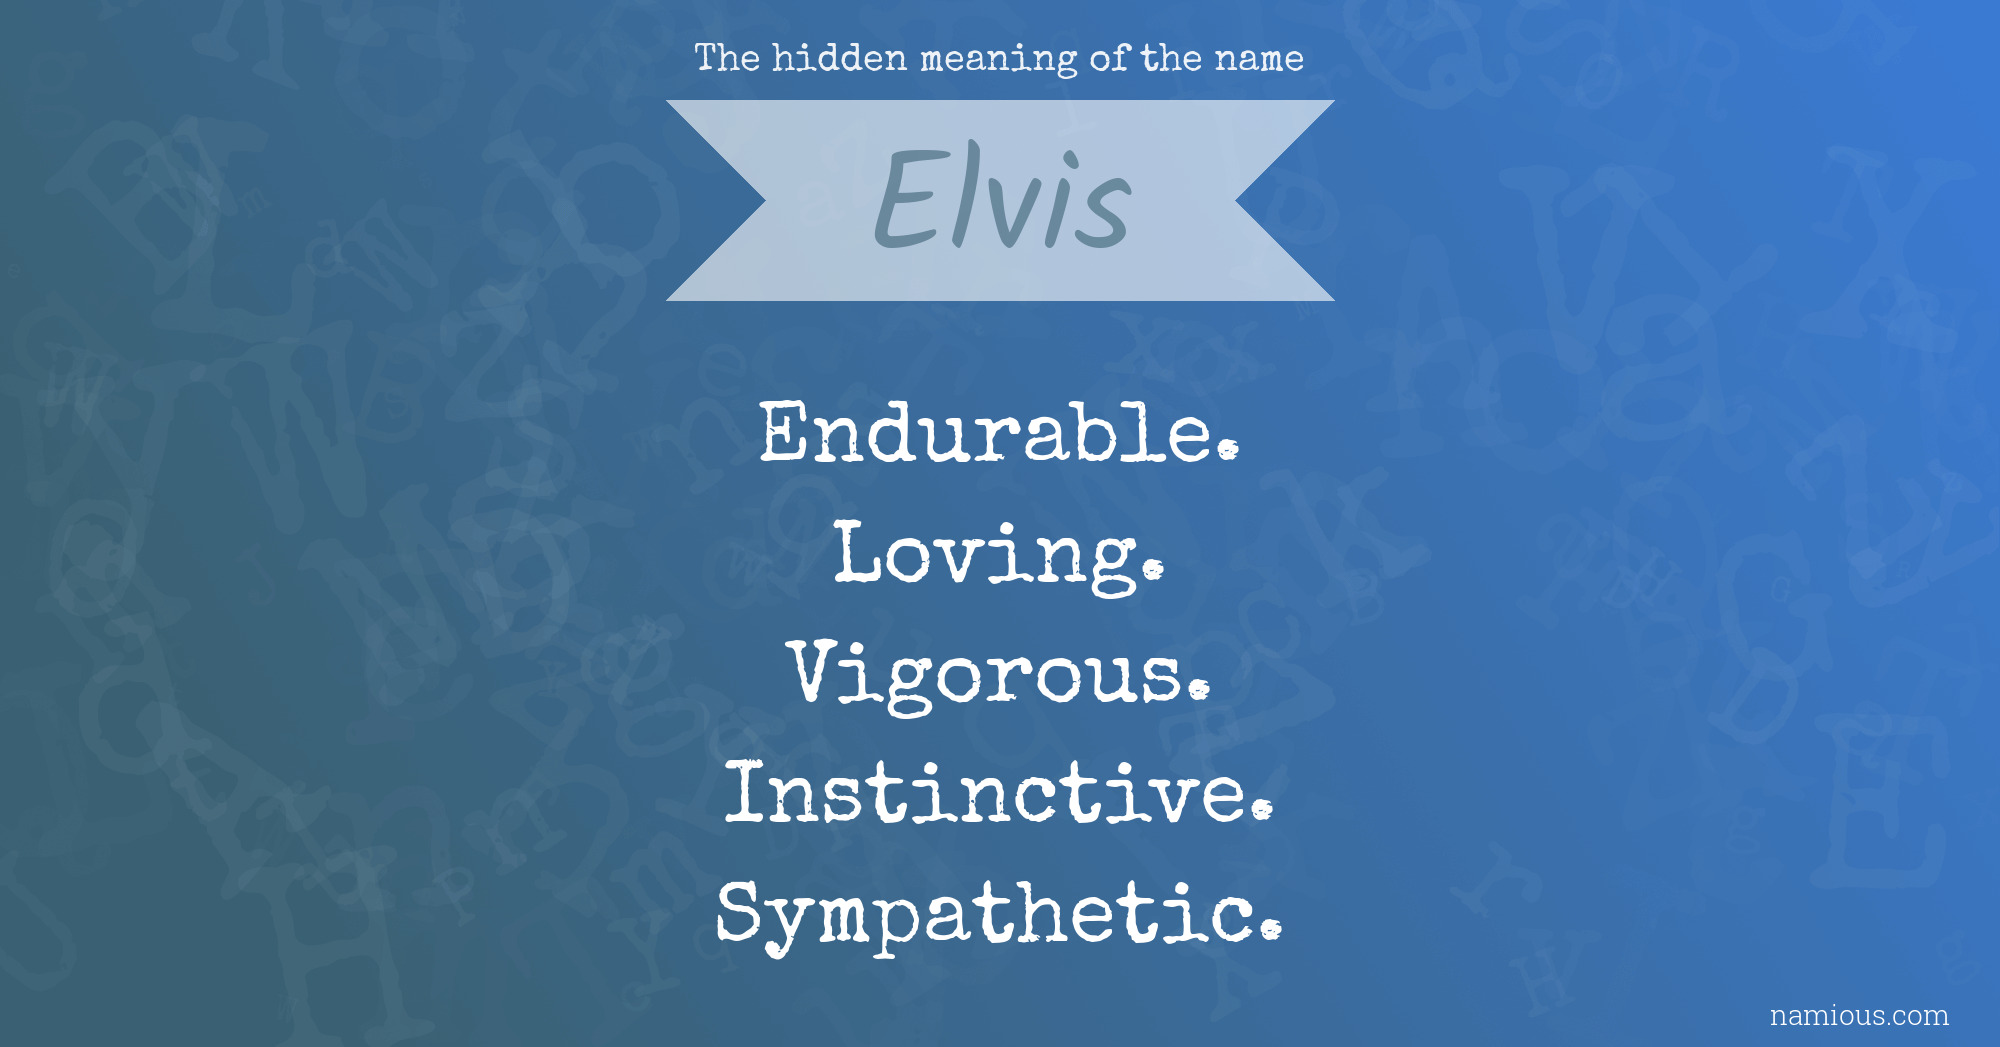 The hidden meaning of the name Elvis